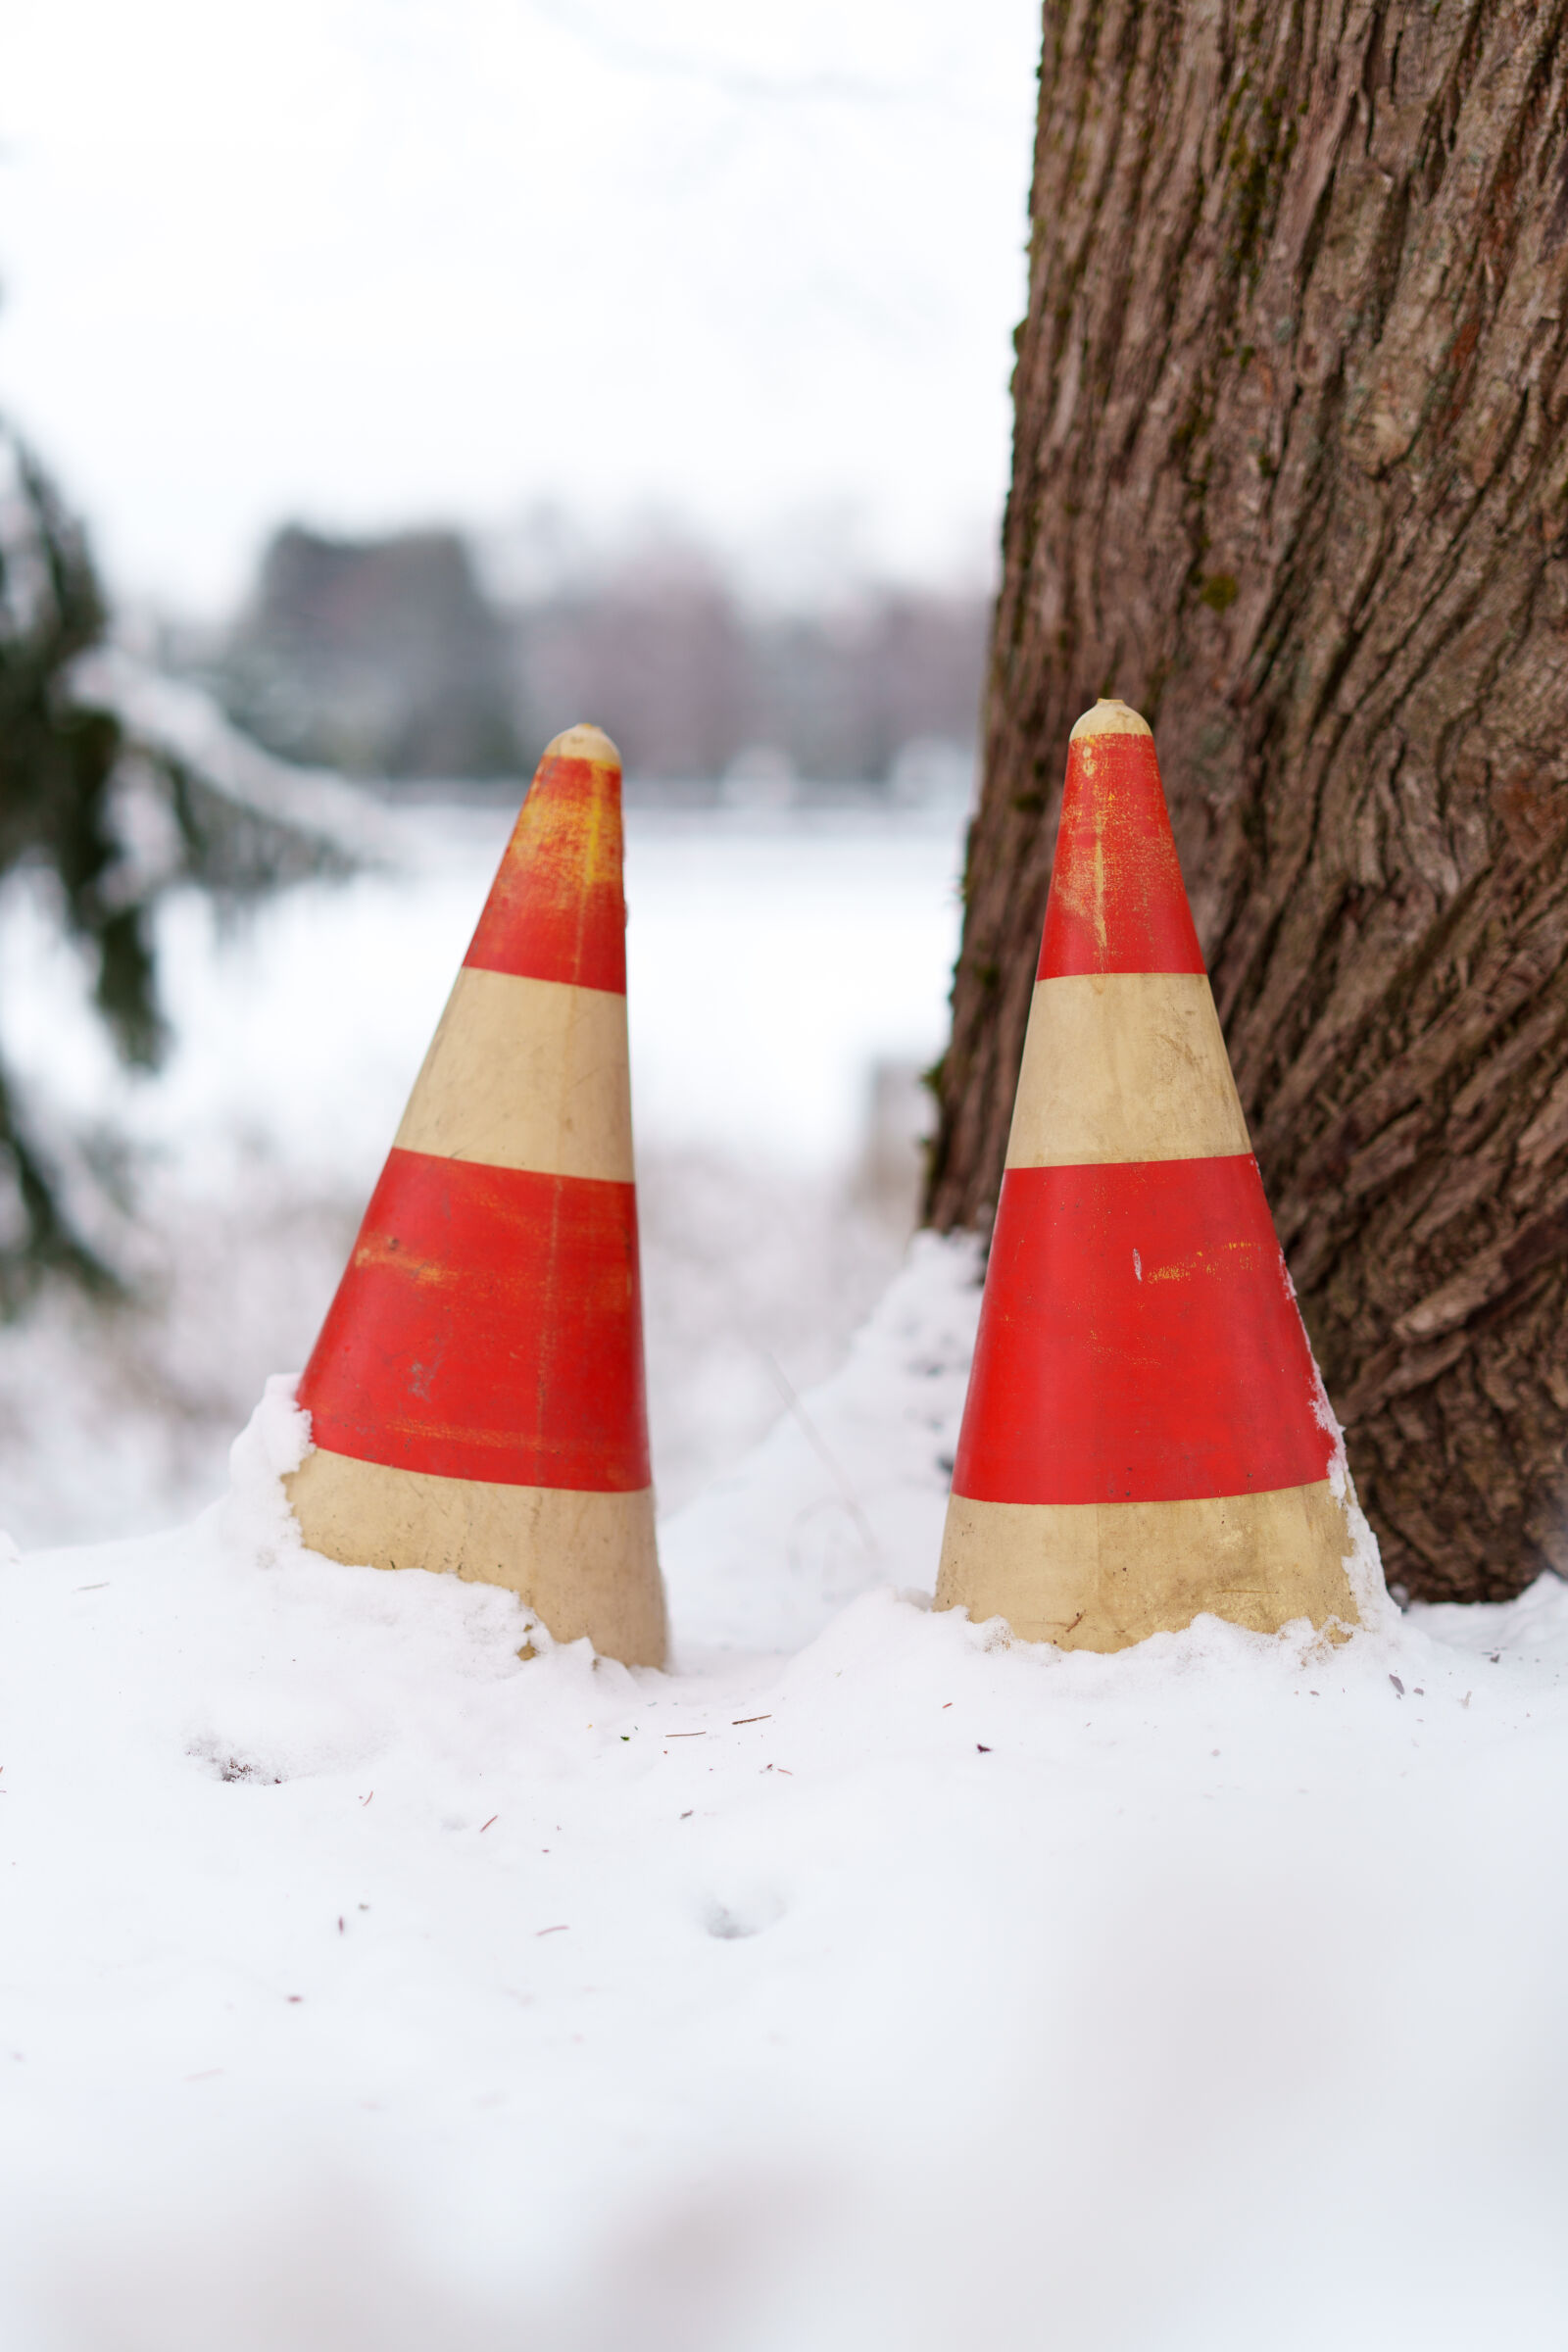 Sony a7R V sample photo. Pair of traffic cones photography